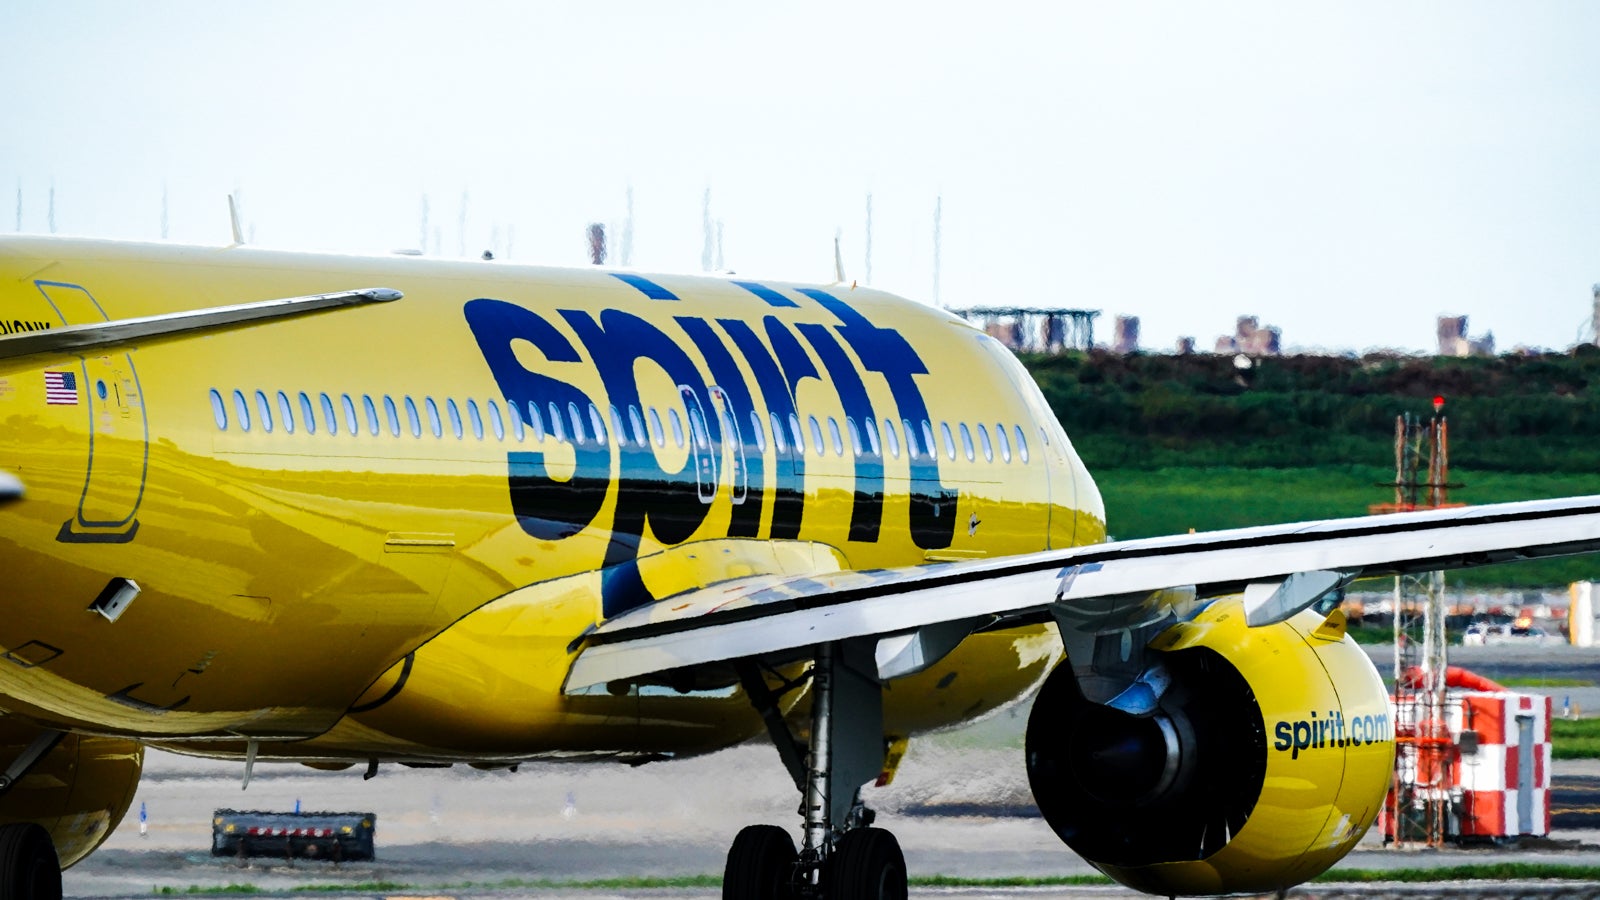 A yellow Spirit Airlines aircraft sitting on the tarmac